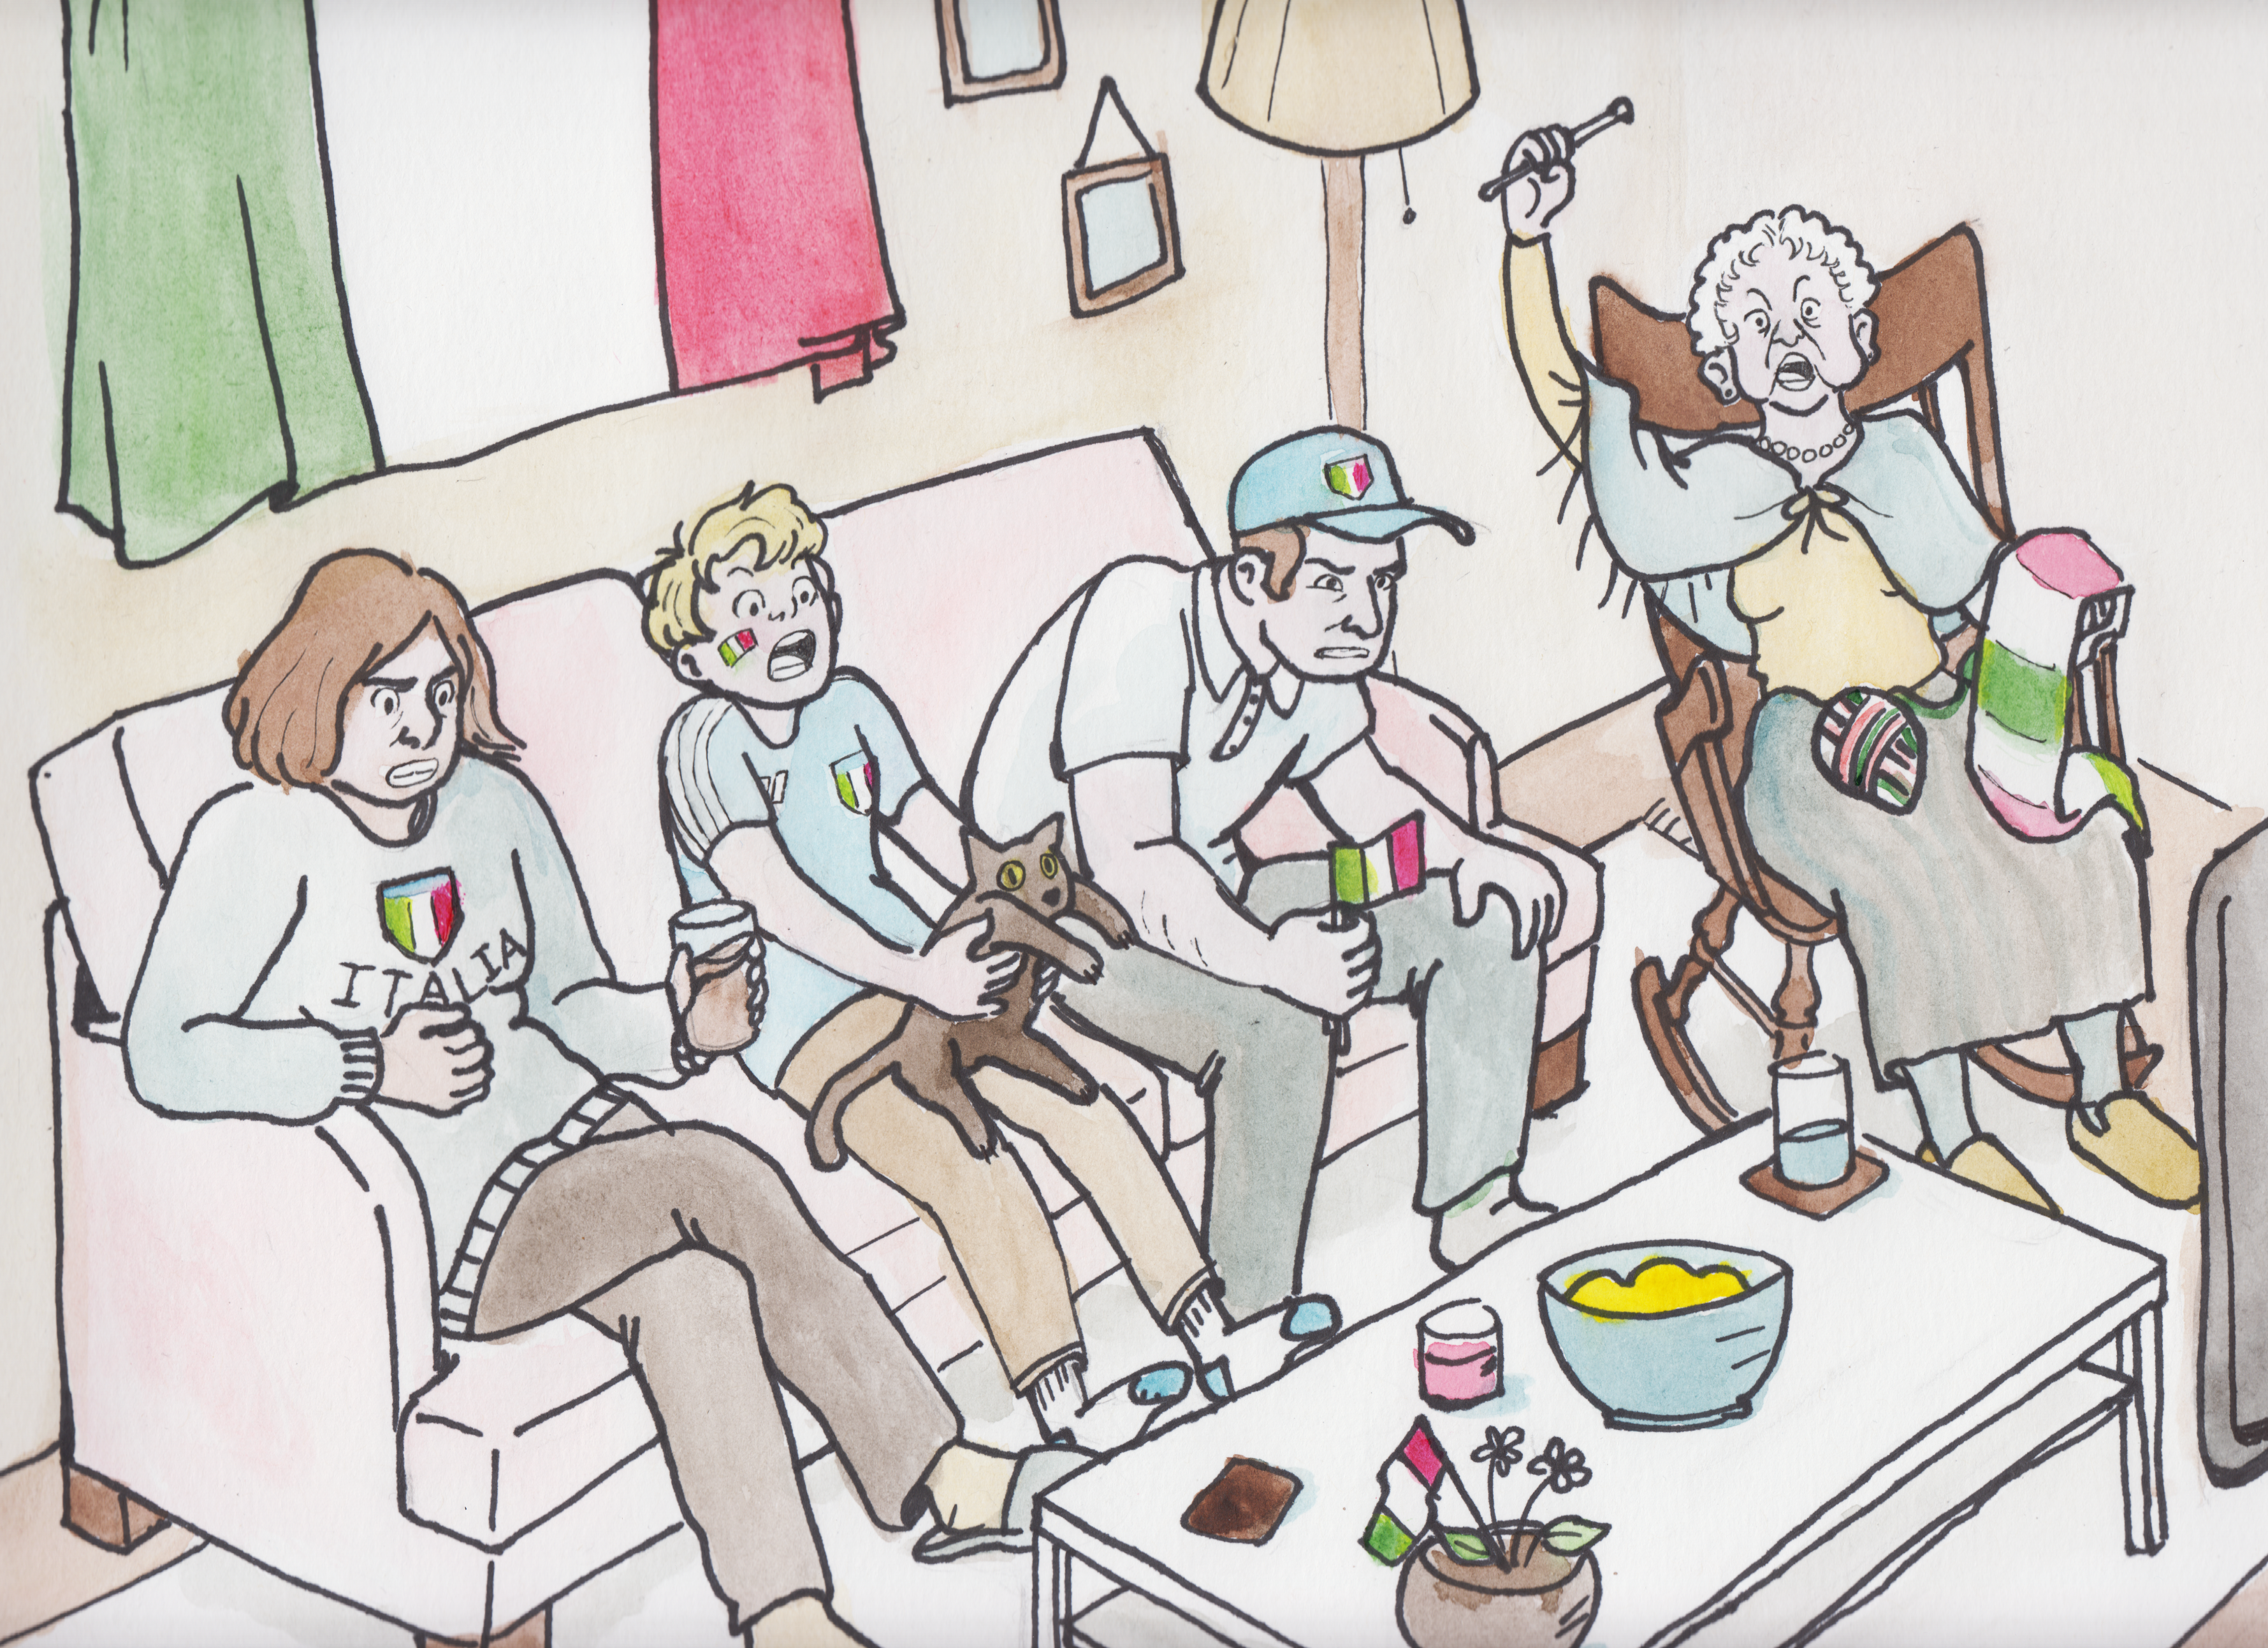 Illustration of a family gathered anxiously on the couch with Italian flags all around them.